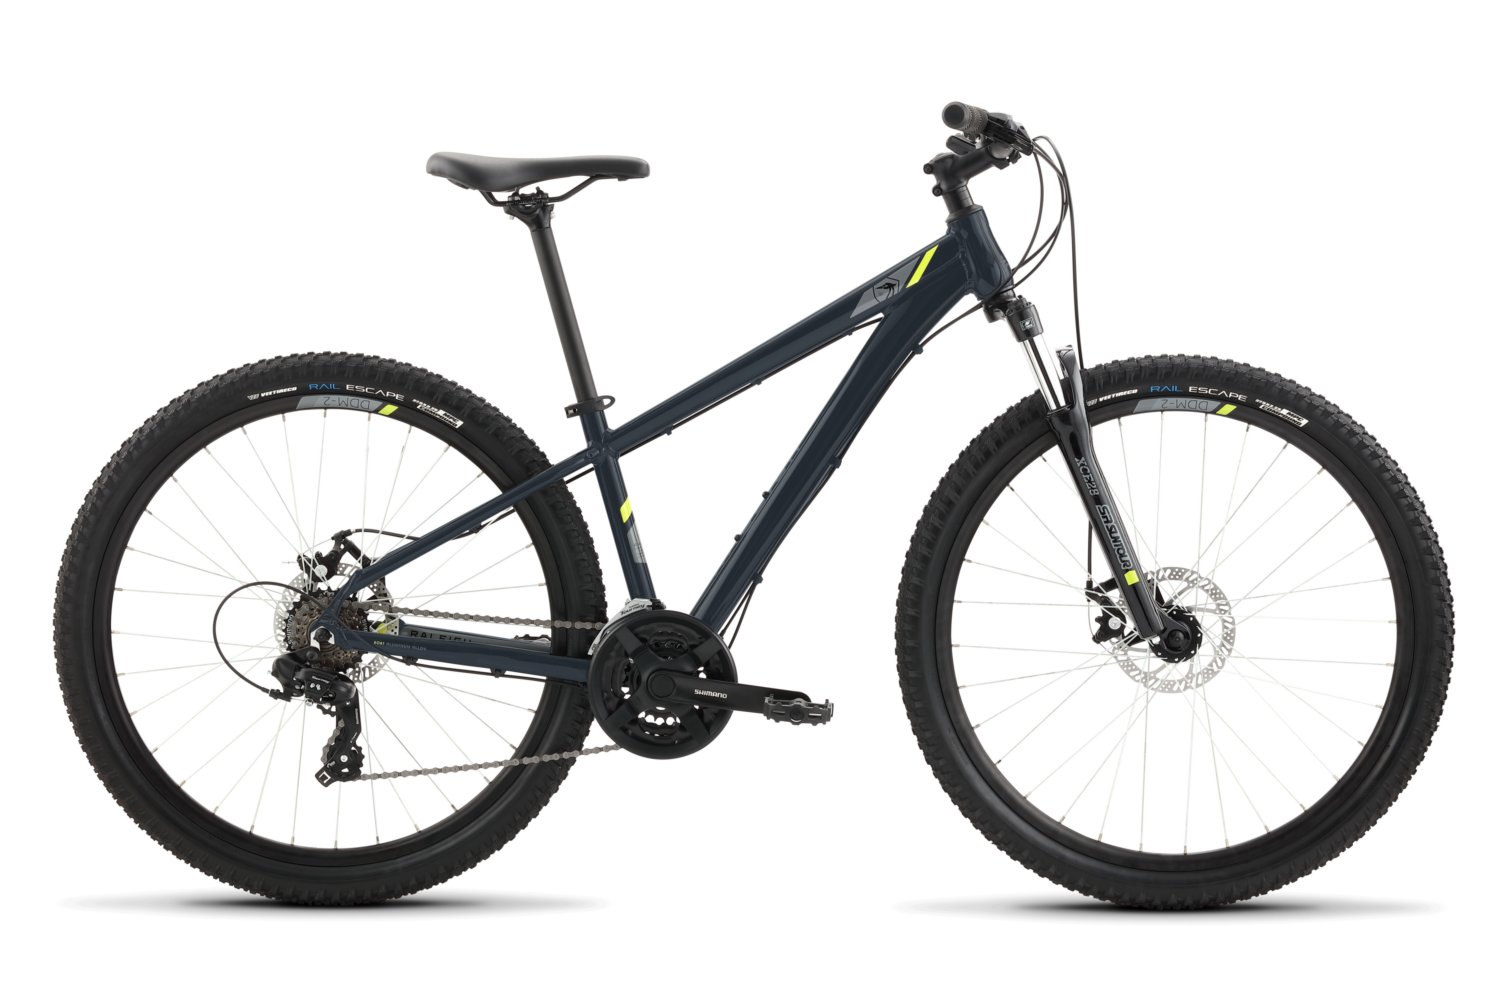 giant contend sl 1 2019